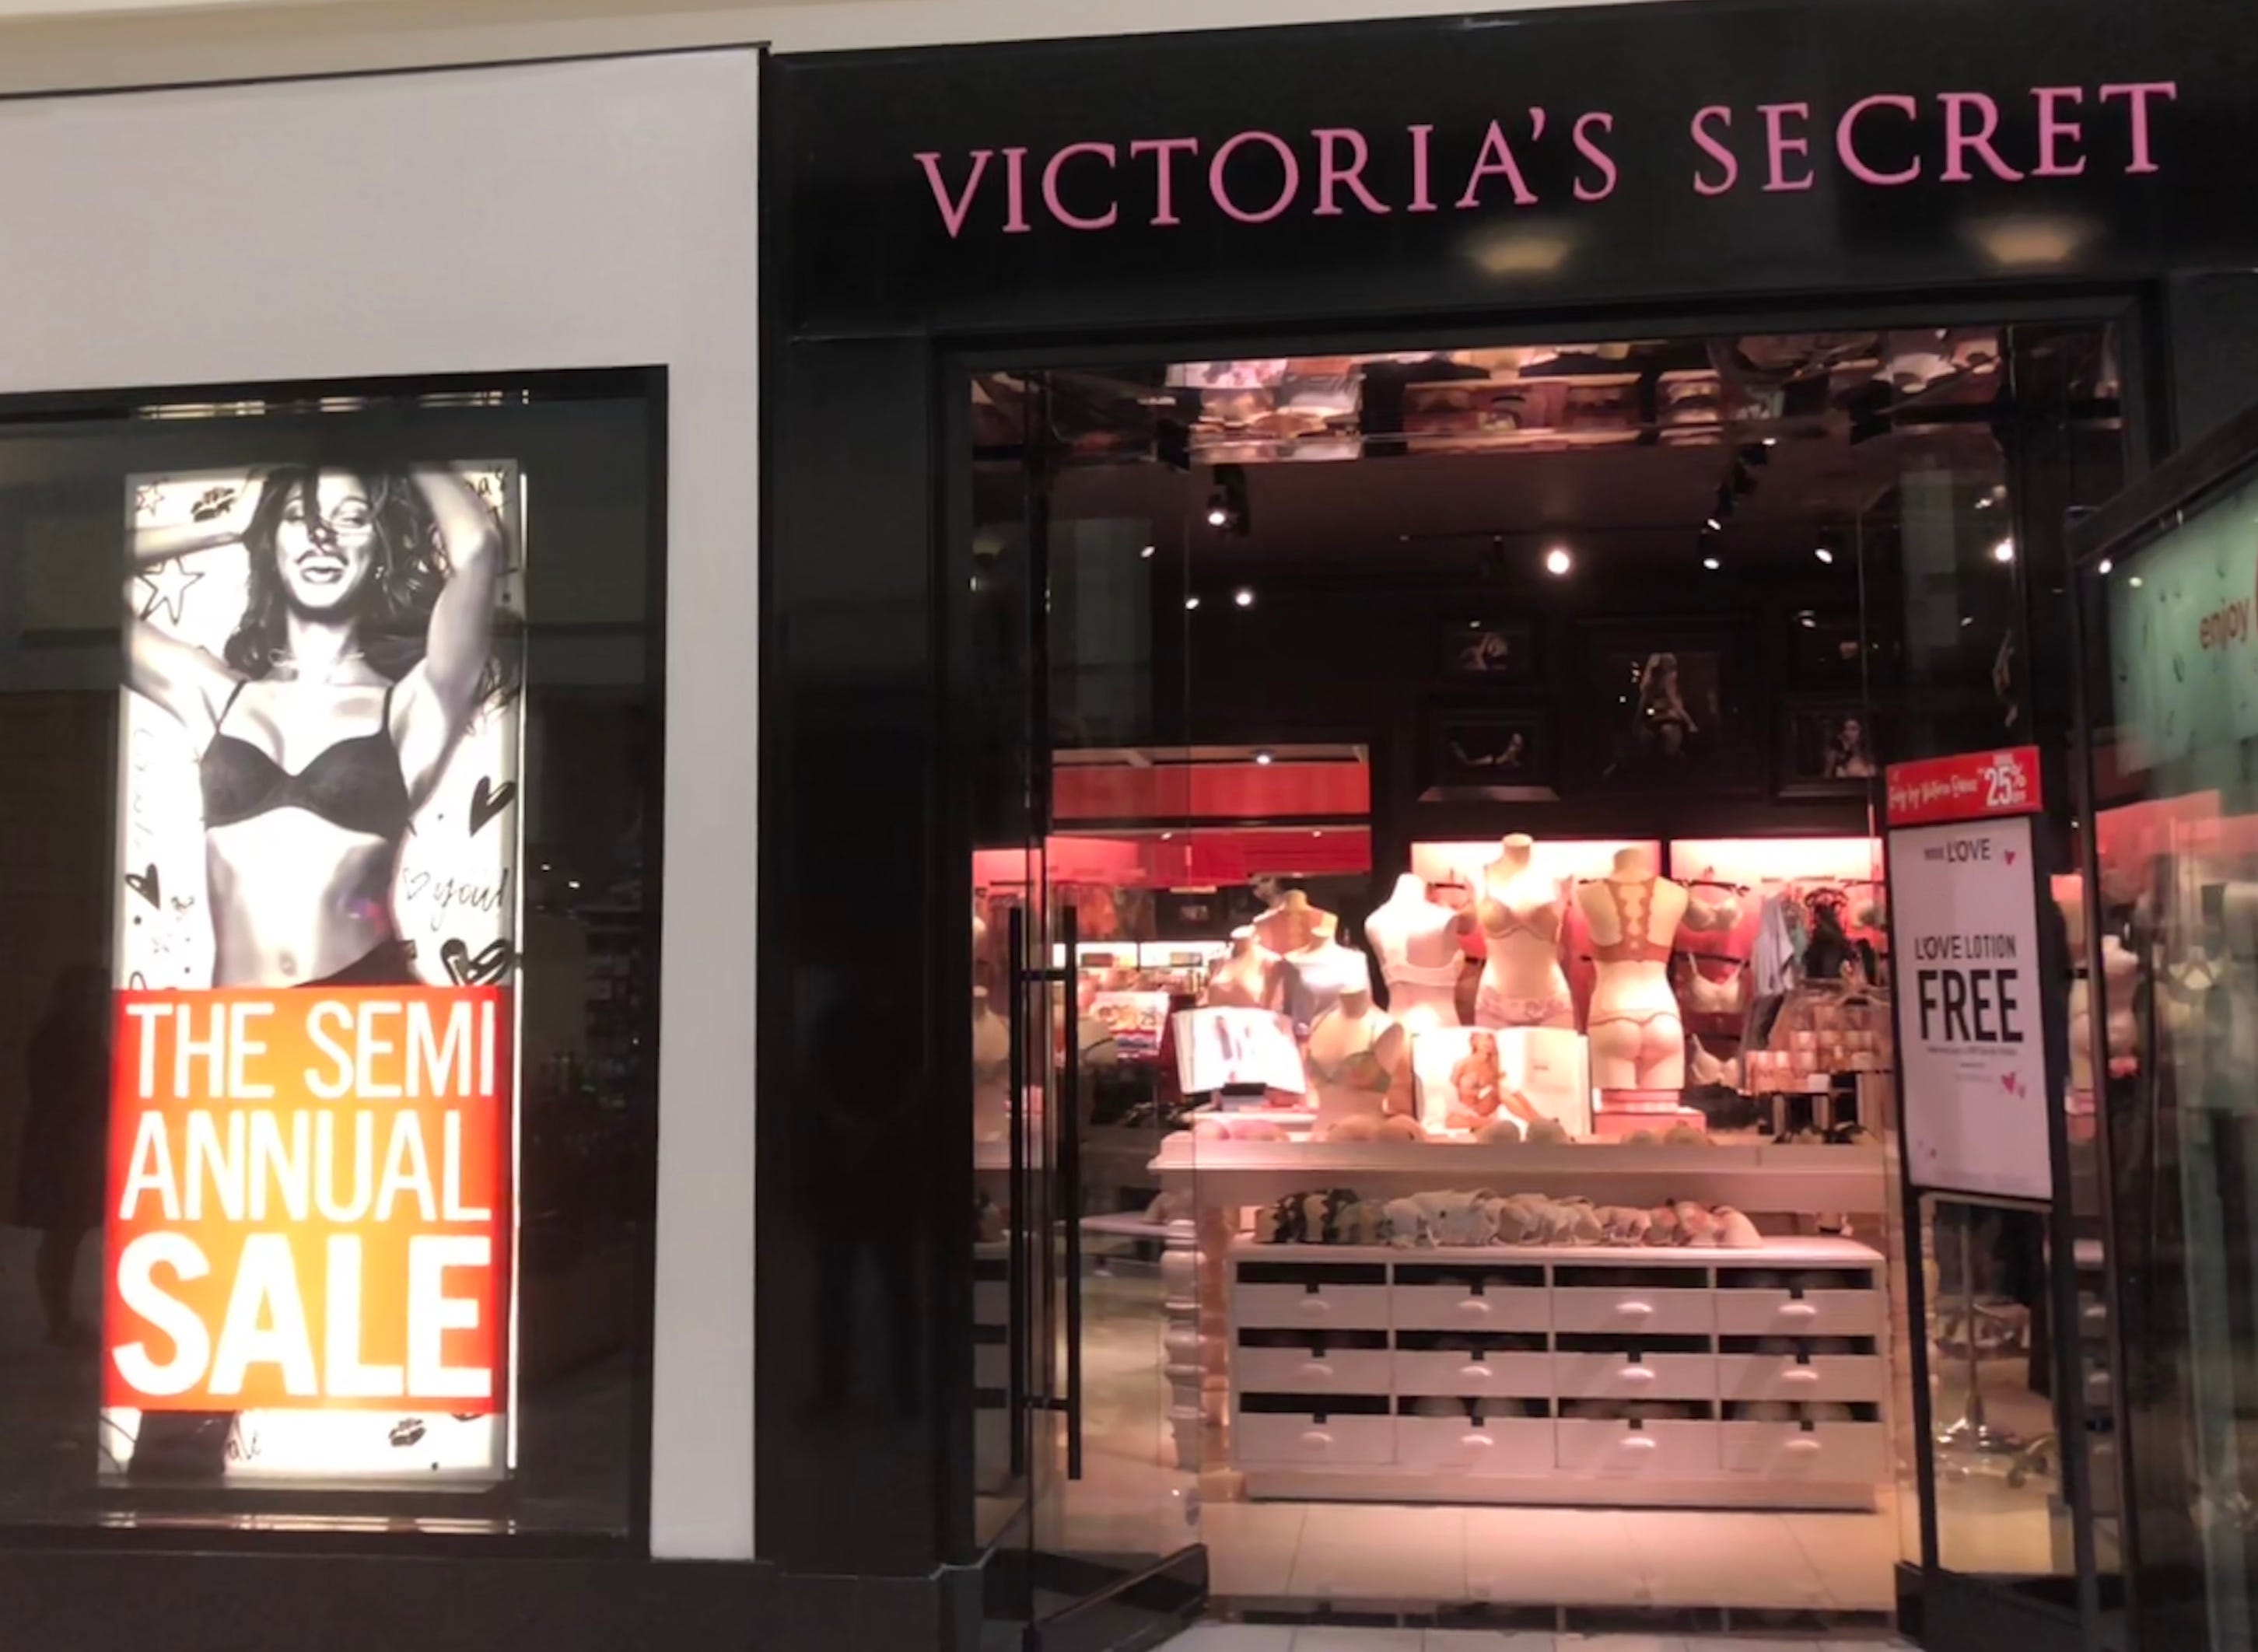 Victoria's Secret would be unwise to reboot as Les Wexner's Secret